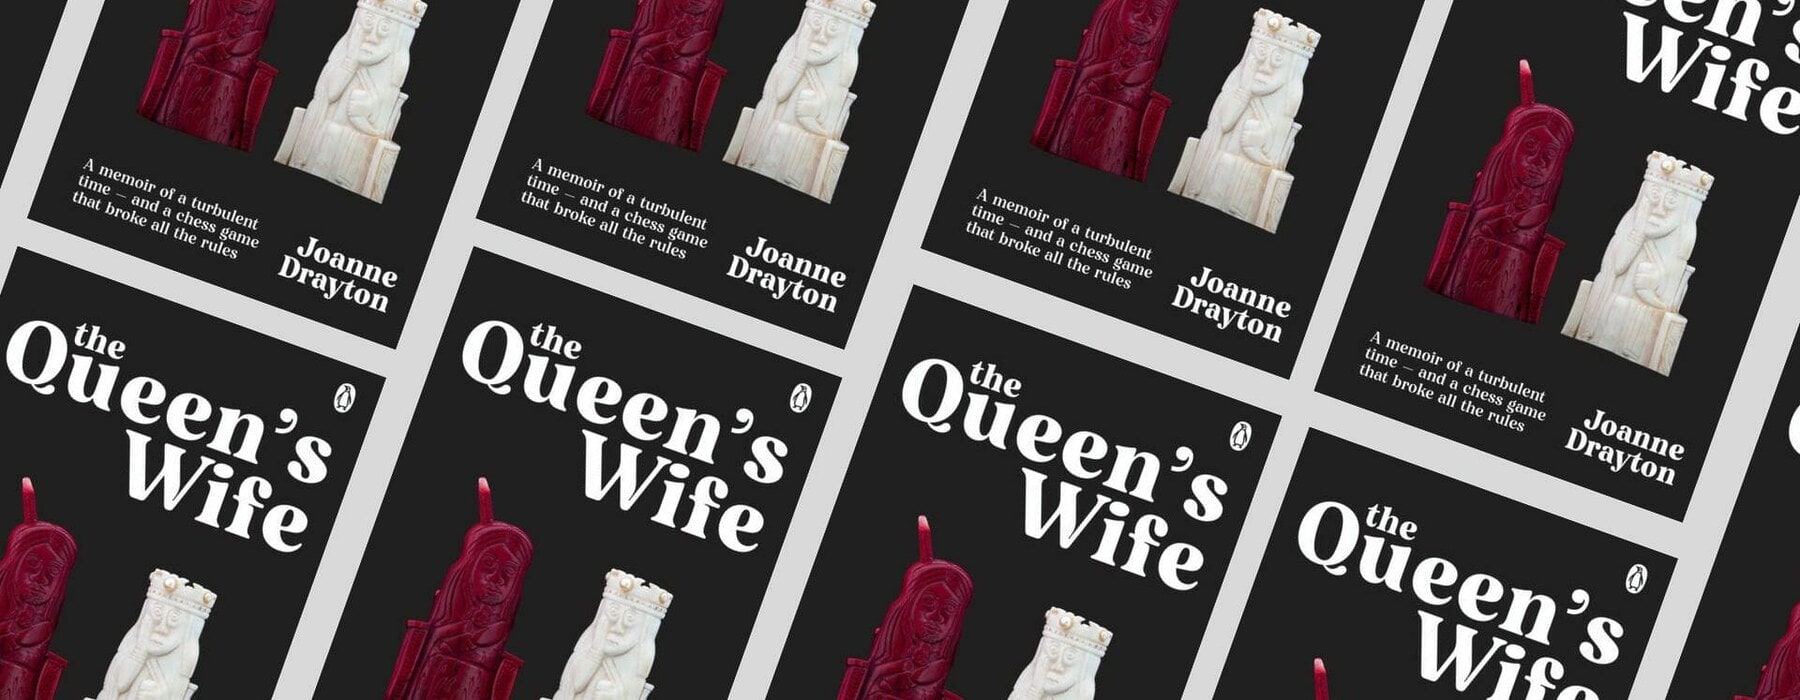 The Queen’s Wife is a deeply personal account of an unconventional love story that intertwines personal whakapapa with the history of an heirloom chess set.